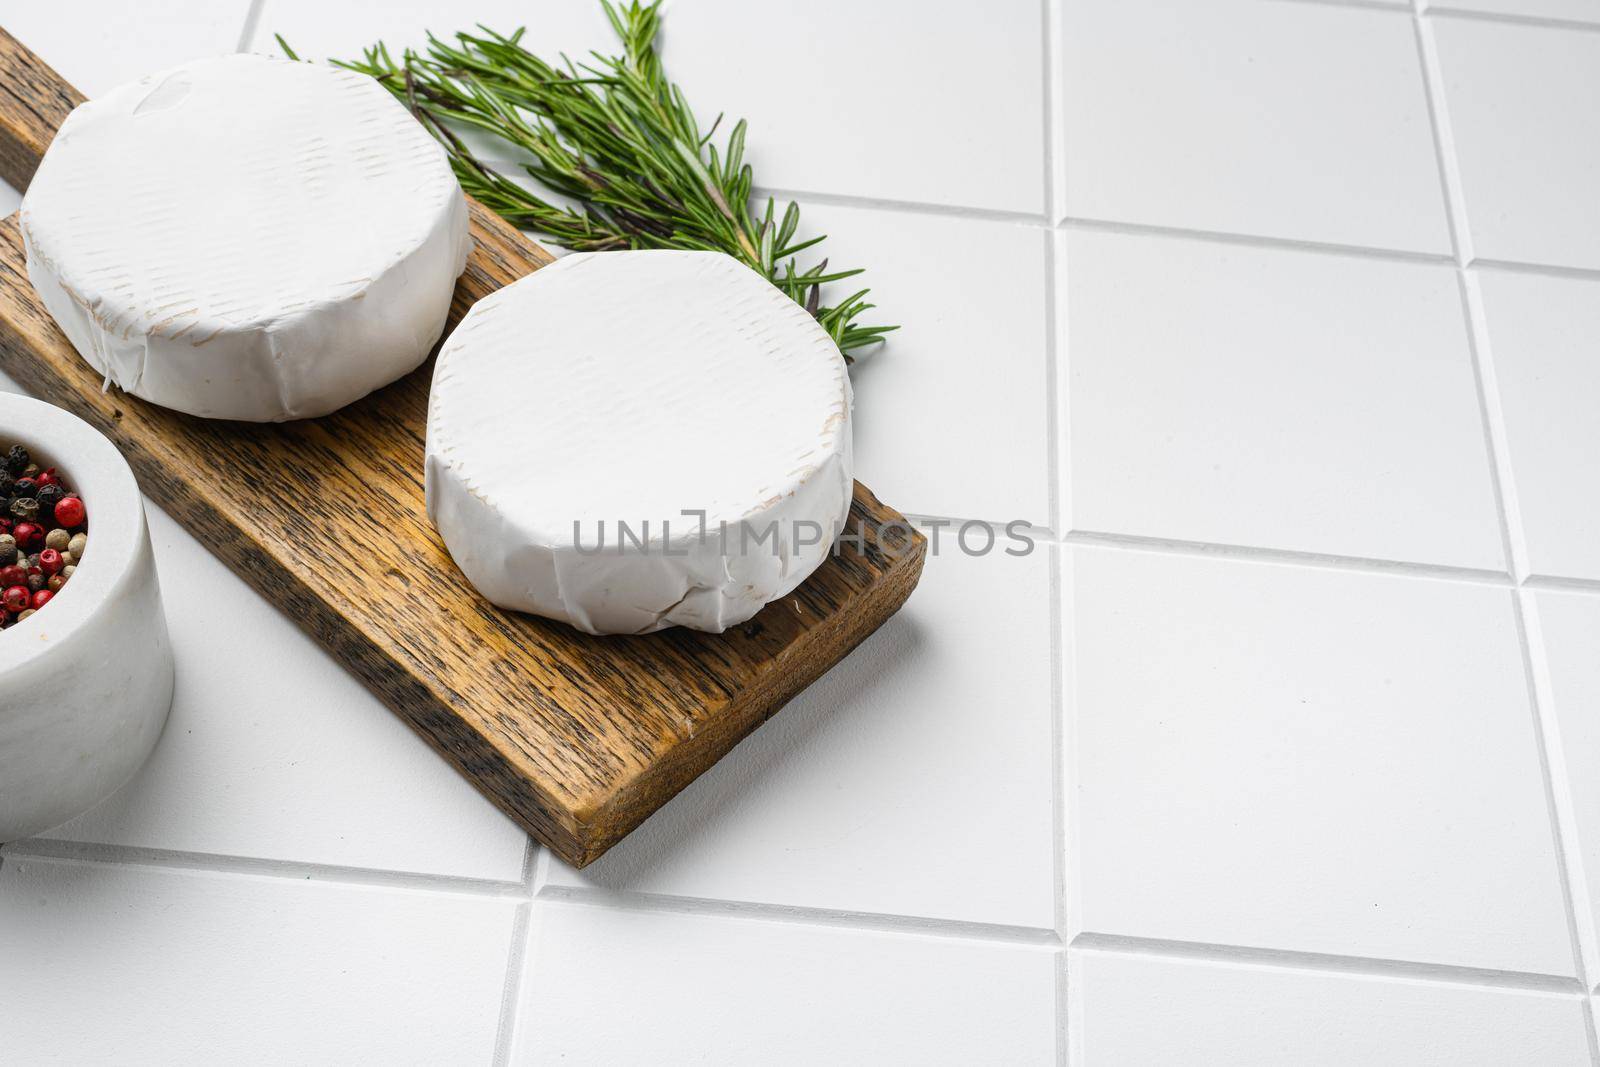 Creamy Brie cheese on white ceramic squared tile table background, with copy space for text by Ilianesolenyi